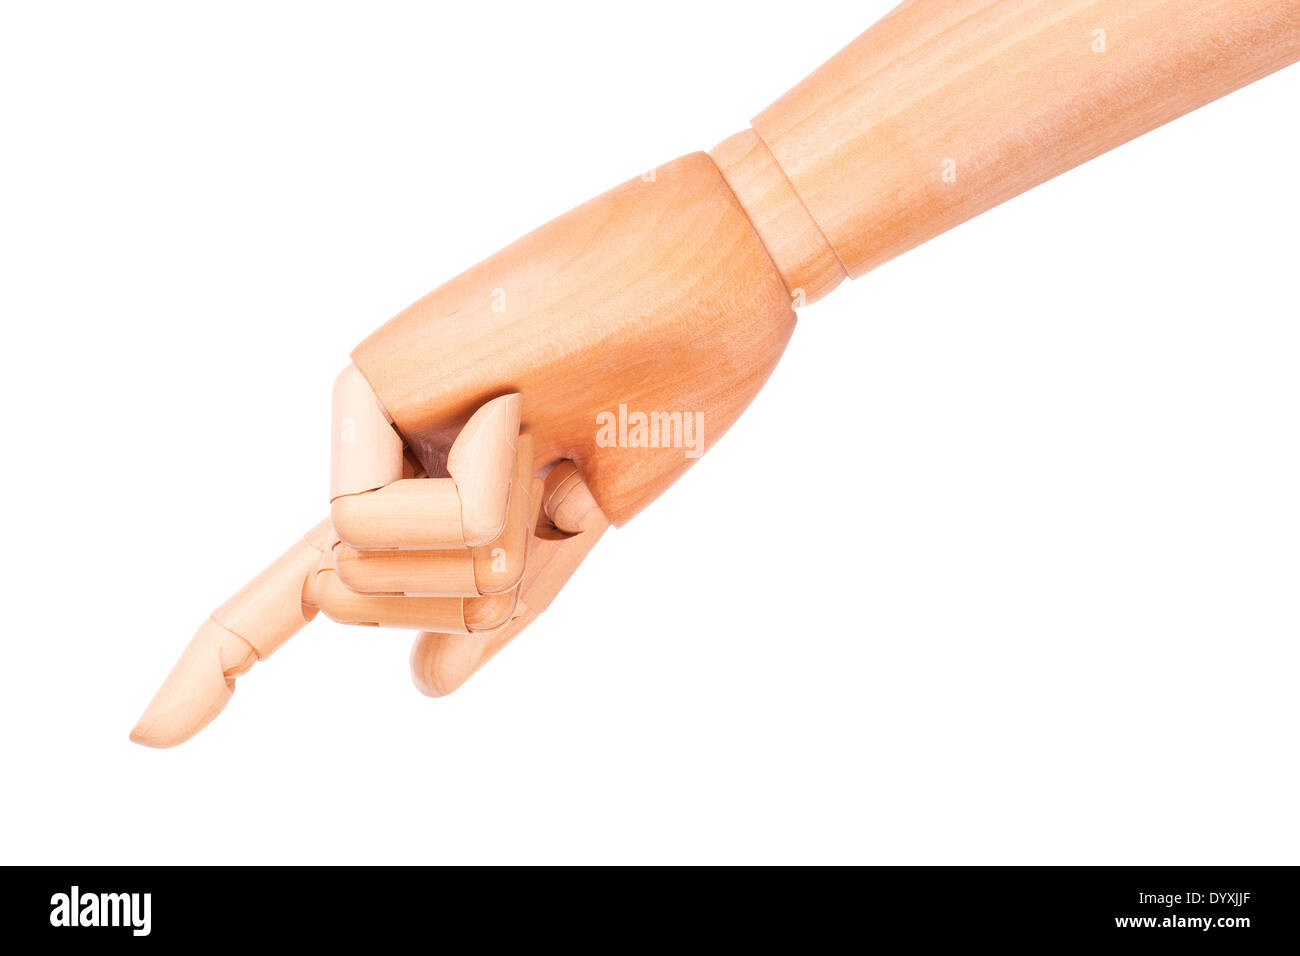 Wooden Mannequin Fake Hand Pointing Finger Up As To Ask A Question